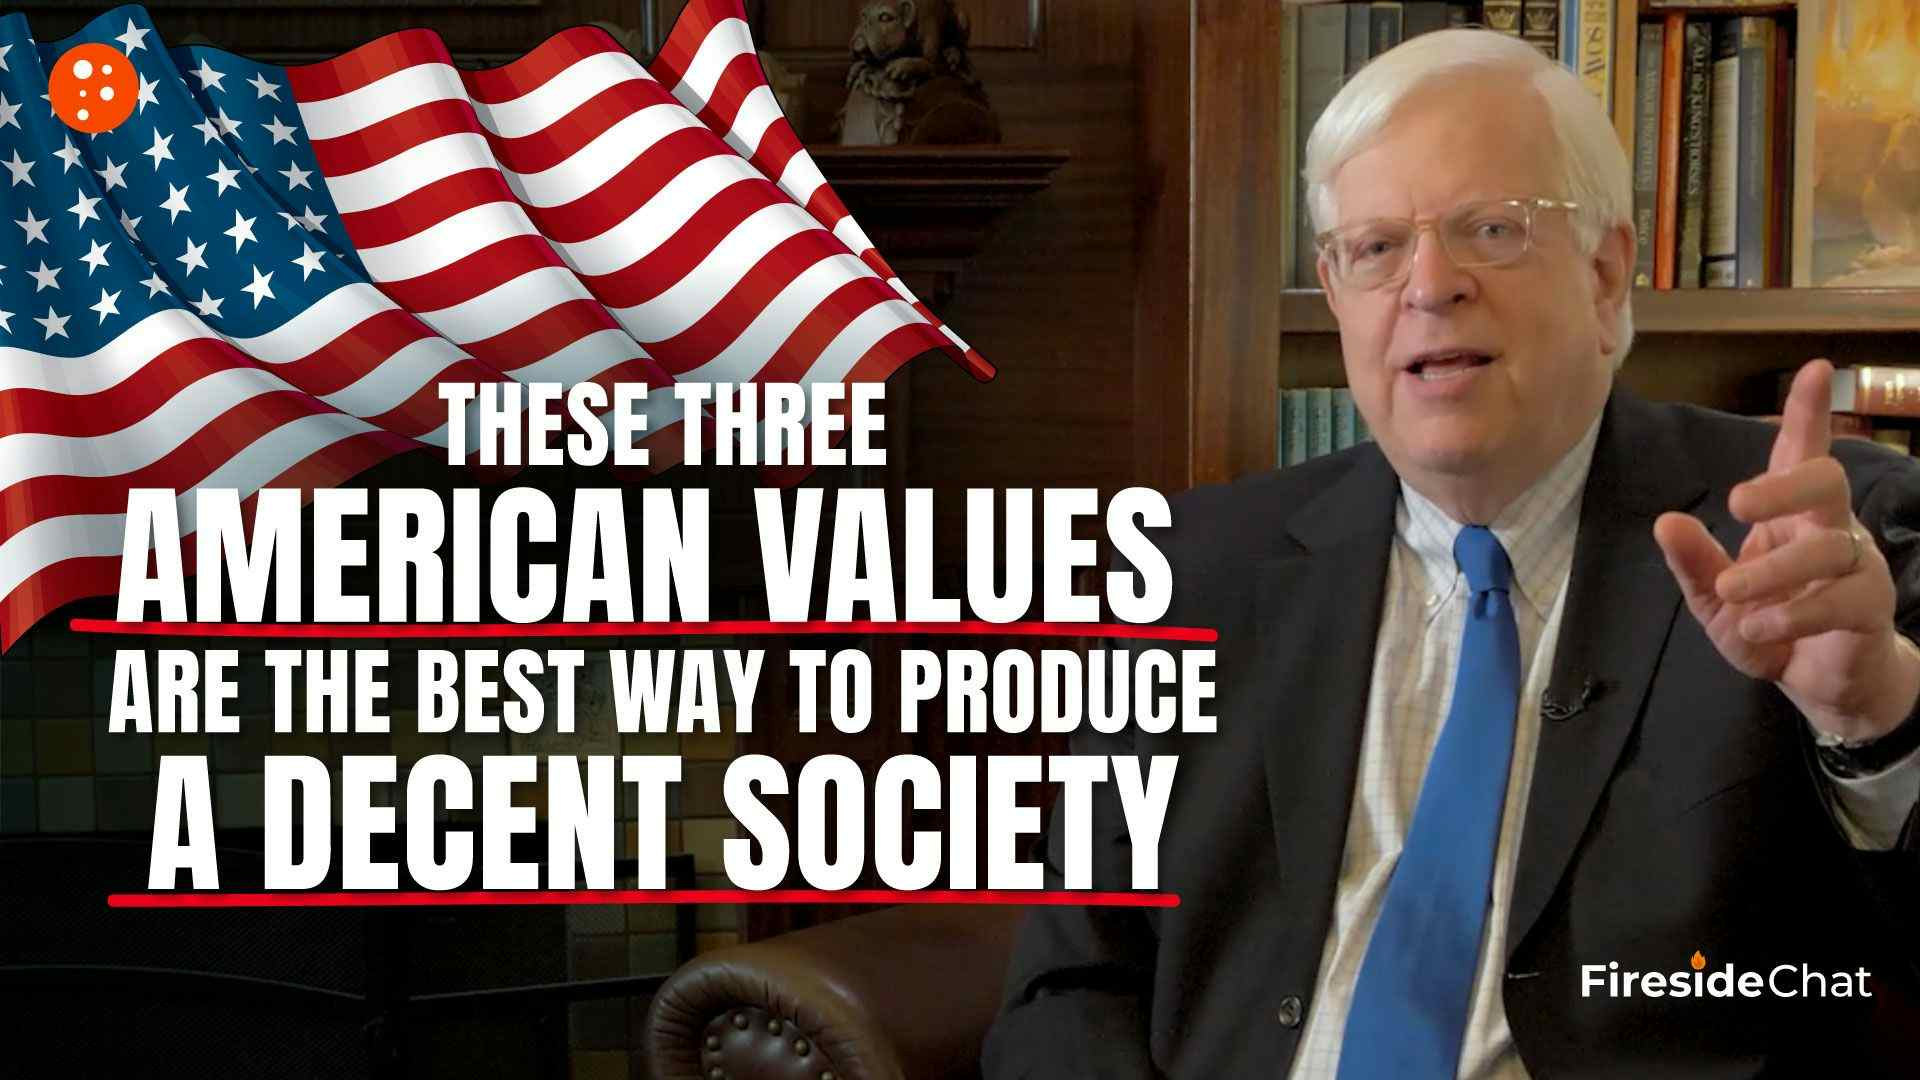 These Three American Values Are the Best Way to Produce a Decent Society